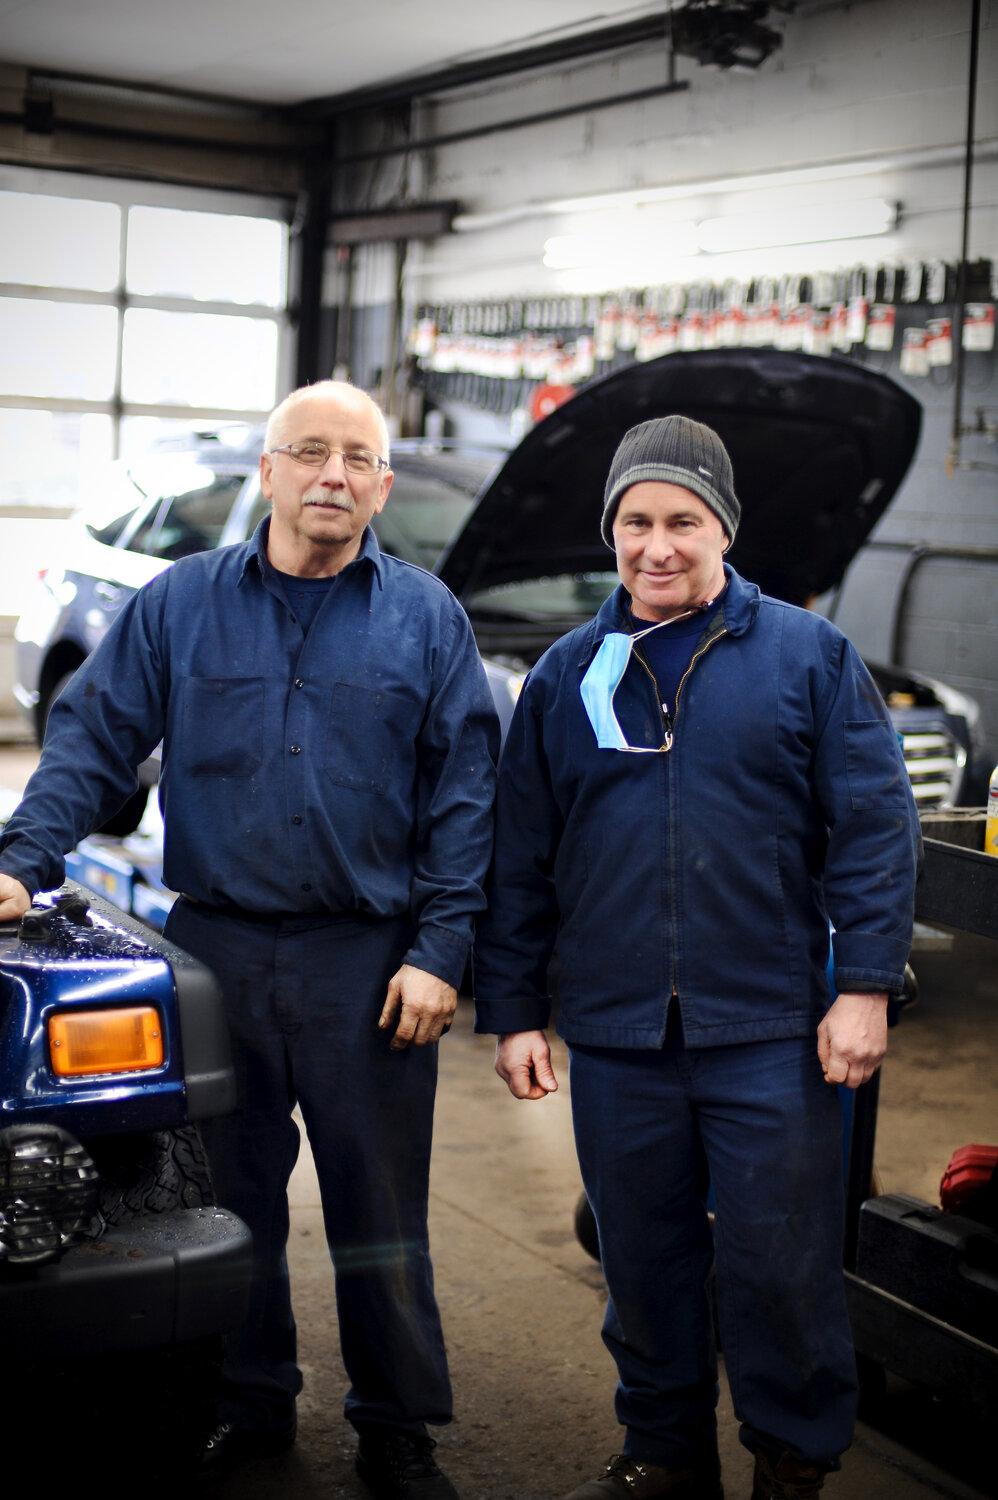 Ernie’s Garage is firmly in the tradition of the longtime Essex automotive repair garage with a devoted following.  Here, meet Ernie Nieberle with Dave White who has worked at Ernie's Garage in Essex for 20 years. (Photo: Kris McGinn)